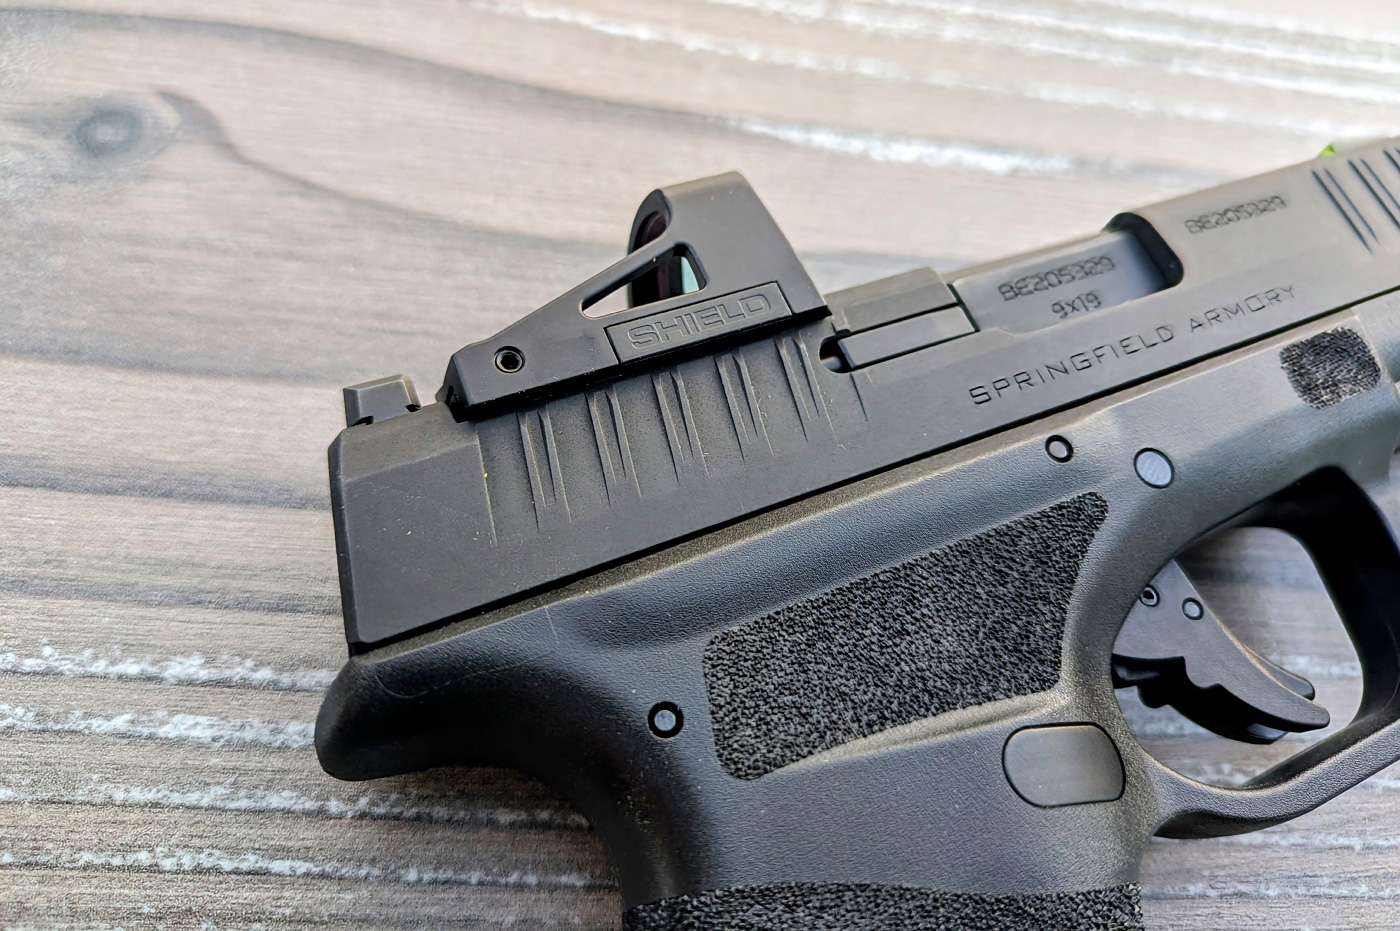 In this photo, you can see the battery compartment on the right side of the Shield RMSd. You can swap batteries without removing the optic from the pistol. The brightness adjustment on the RMSd is another standout feature. It automatically adjusts to the ambient light conditions. This range includes a lowest setting compatible with night vision devices and a highest setting that remains visible against the sky in bright daylight. This adaptability is crucial for a concealed carry optic, as it ensures optimal visibility in all lighting conditions.